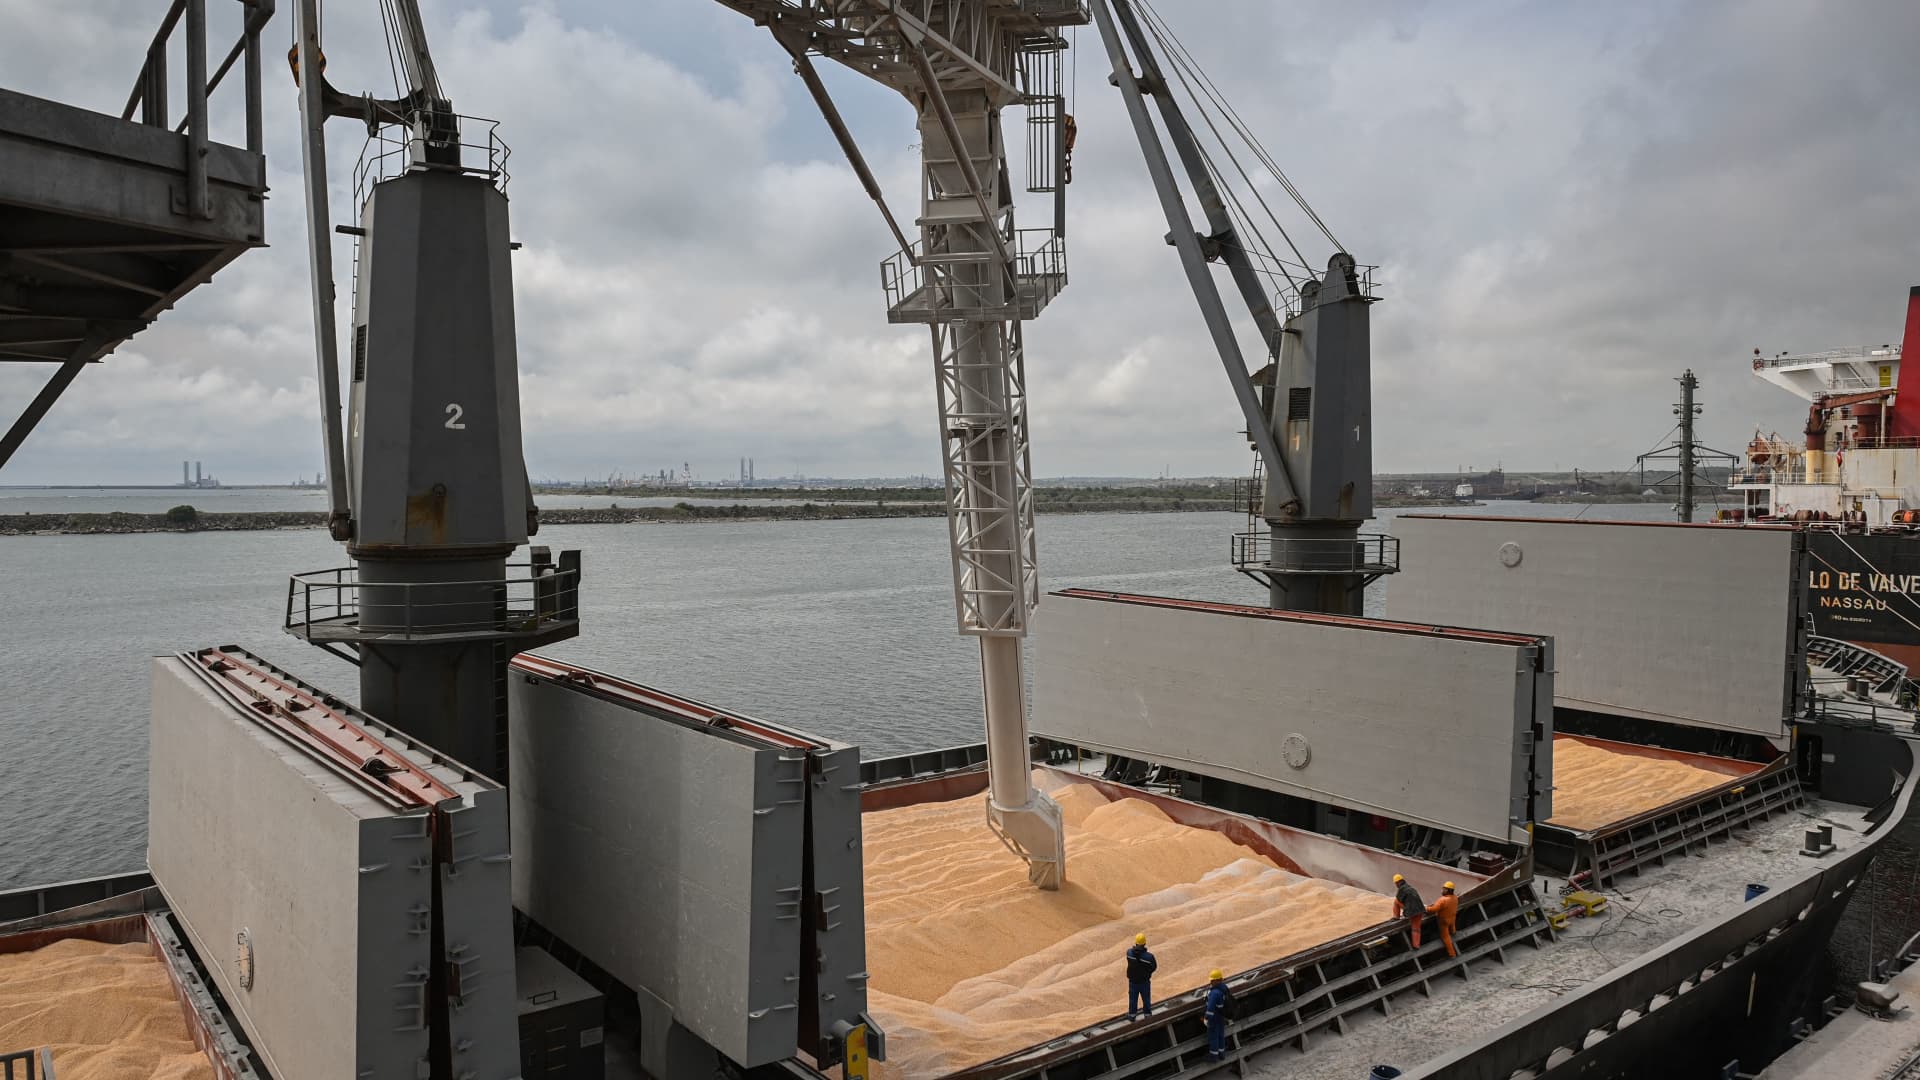 Workers assist the loading of corn onto a ship at Pier 80 in the Black Sea port of Constanta, Romania, on May 3, 2022. The Romanian port seeks to become an export hub for neighboring Ukraine after Russia's invasion cut off its sea routes.